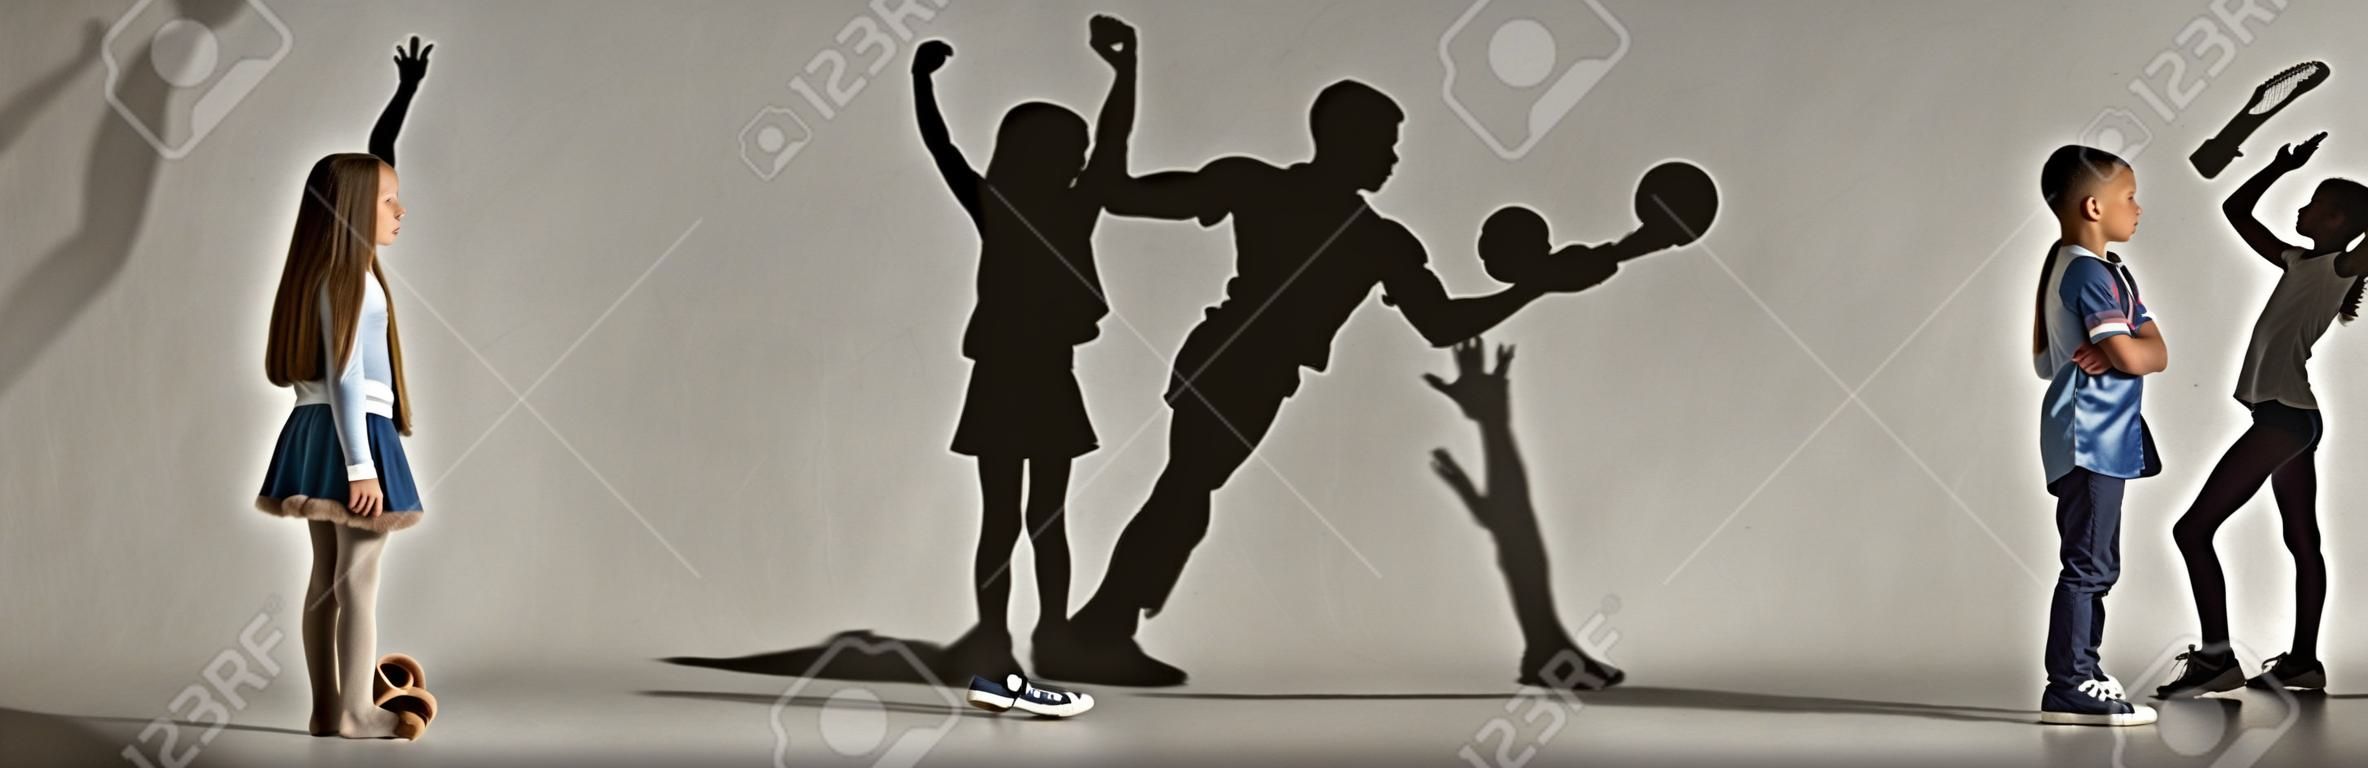 Childhood and dream about big and famous future. Conceptual image with boy and girl and shadows of fit athlete, hockey player, bodybuilder, ballerina. Creative collage made of 2 models.